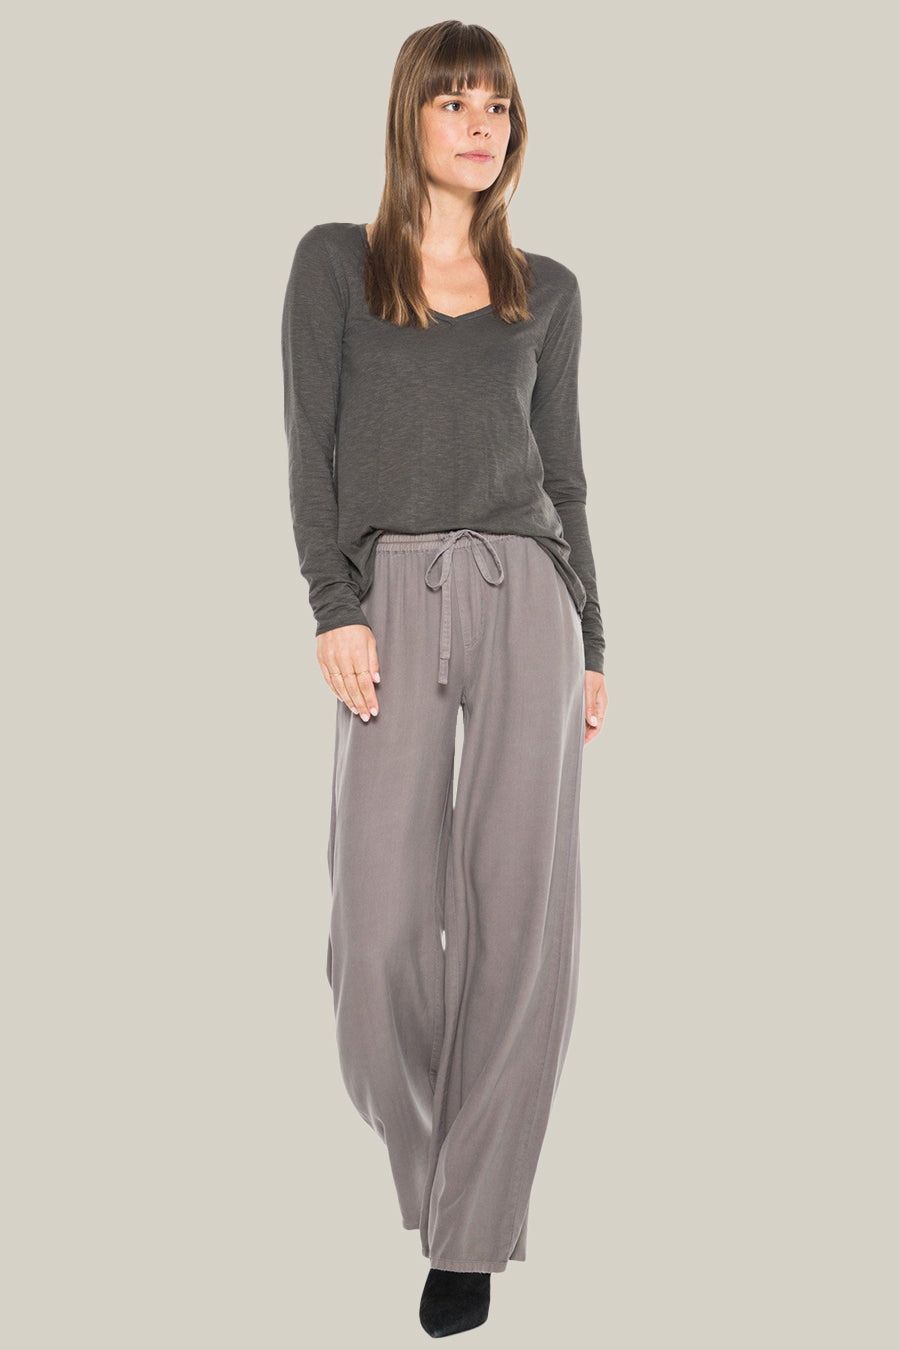 100% Silk relaxed pants in Charcoal Grey